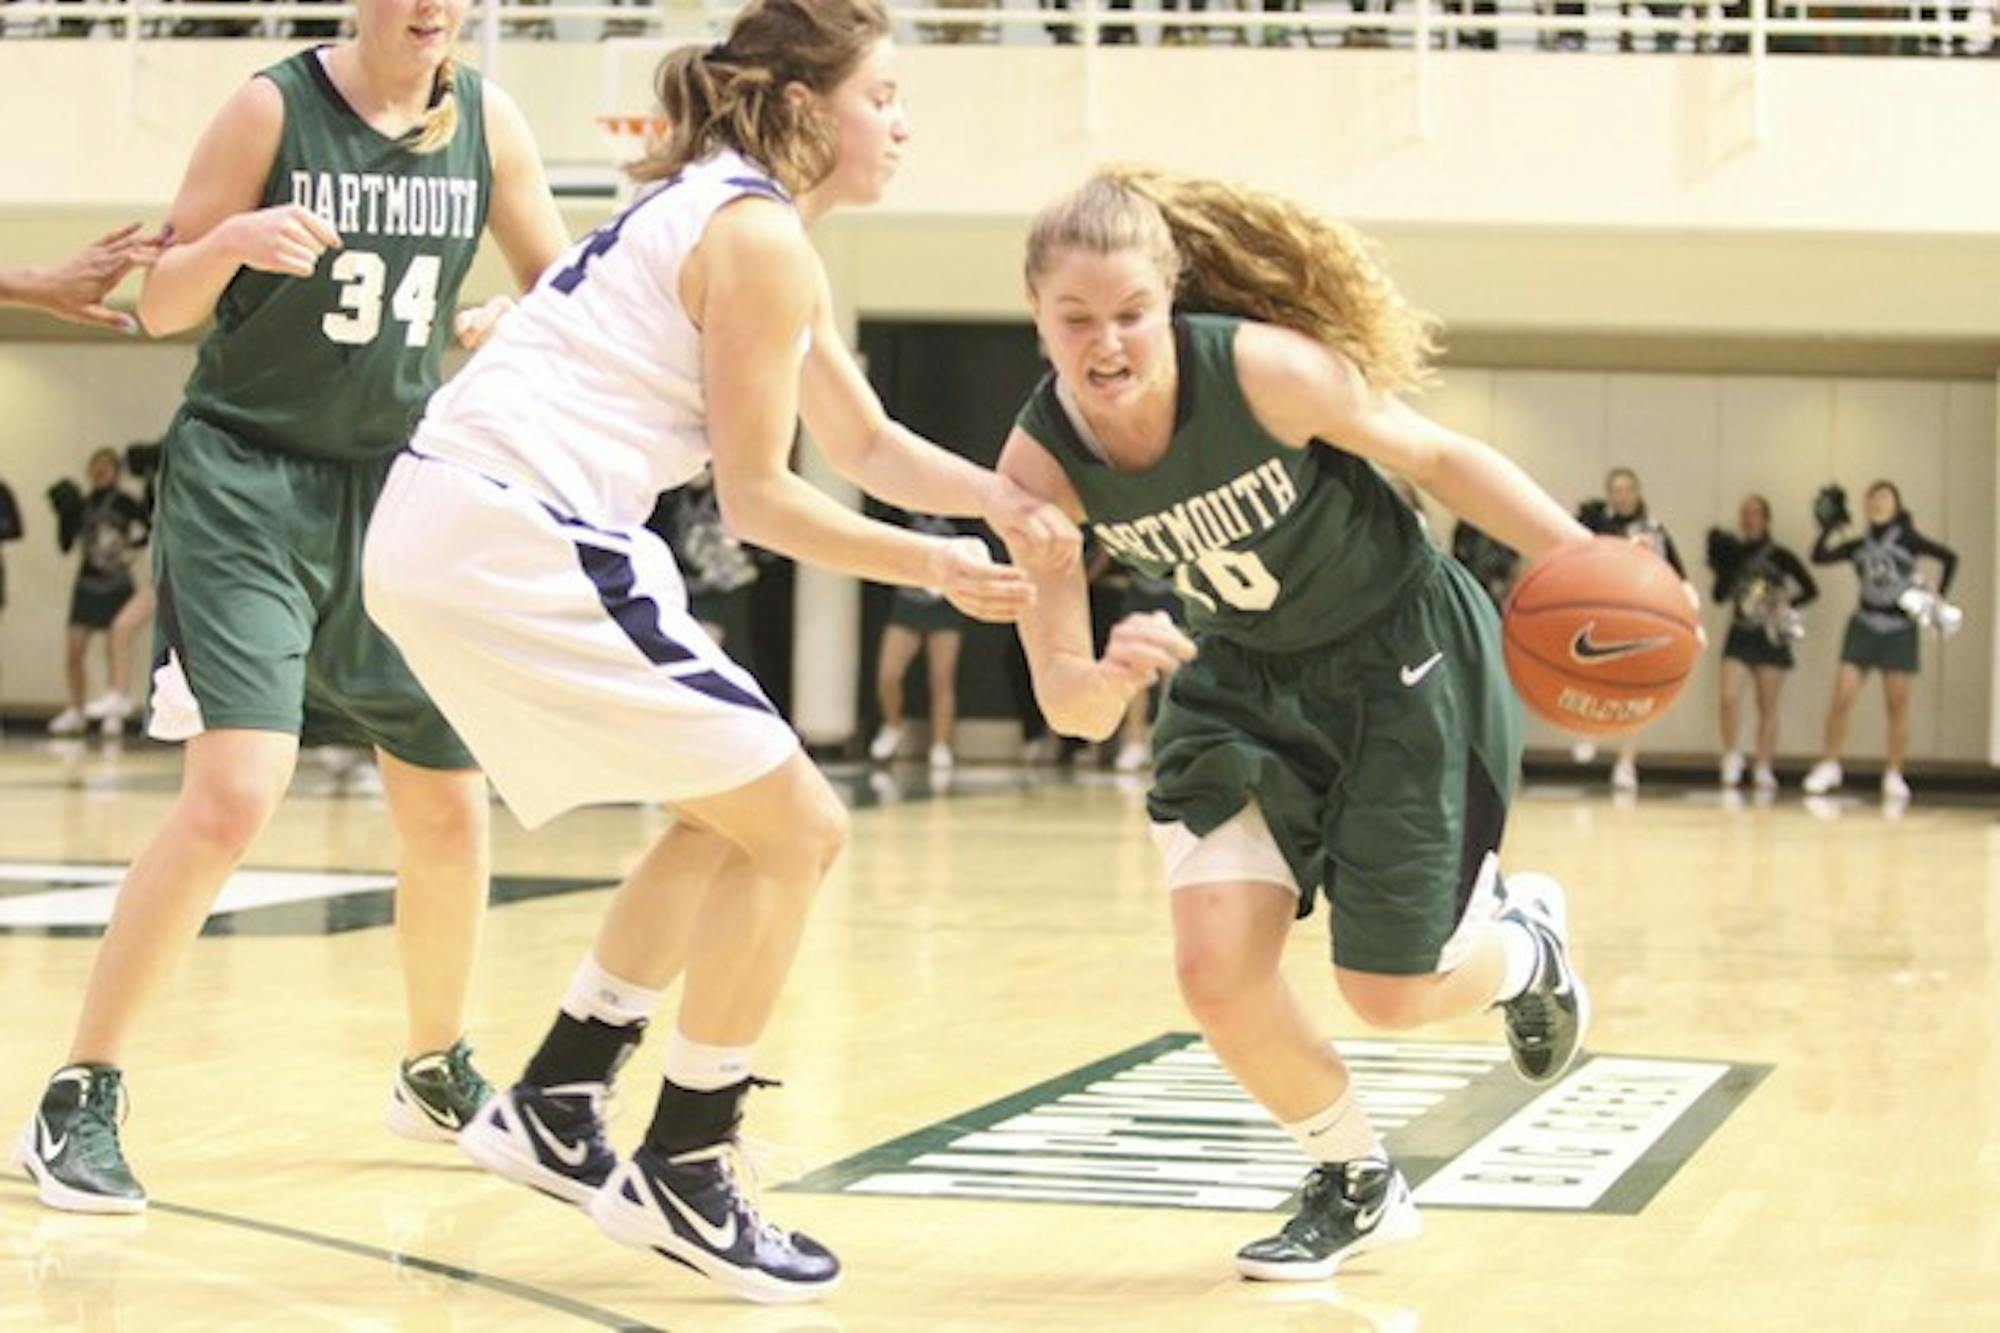 Guard Nicola Zimmer '14 went 0-for-5 with three rebounds in Friday night's 74-50 loss to Brown University at Leede Arena.